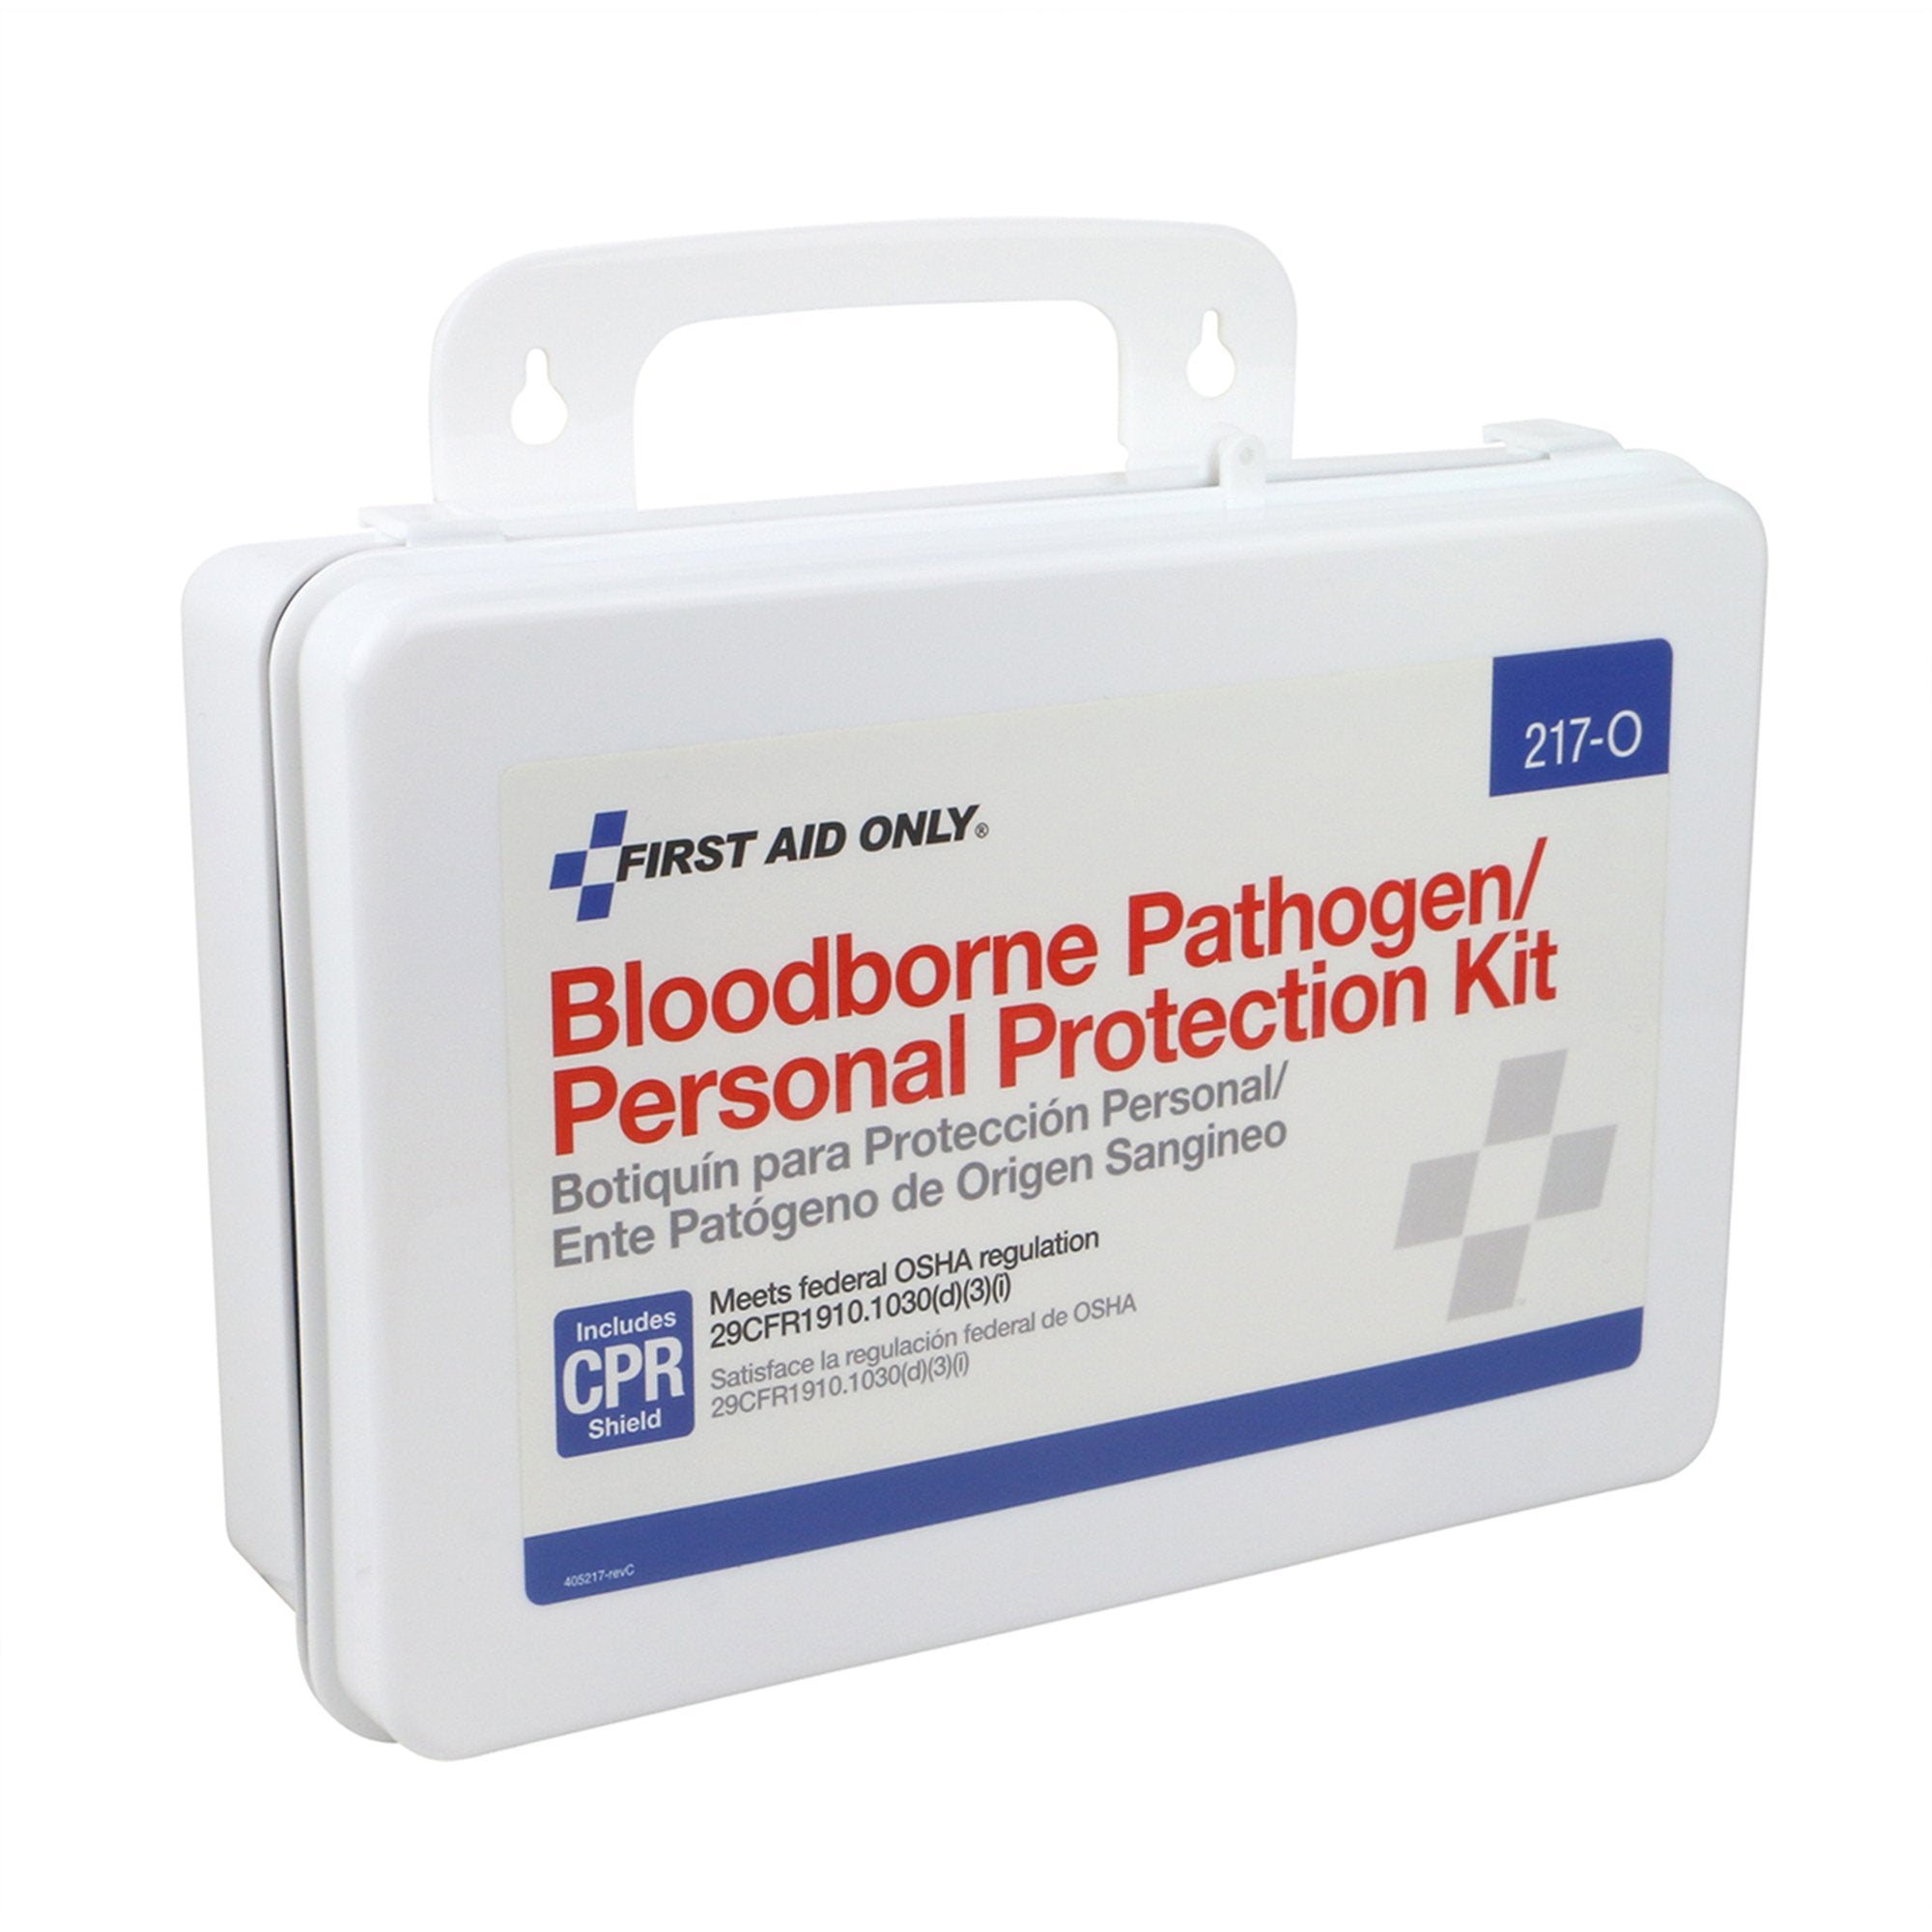 Blood Borne Pathogen / Personal Protection /Spill Kit First Aid Only